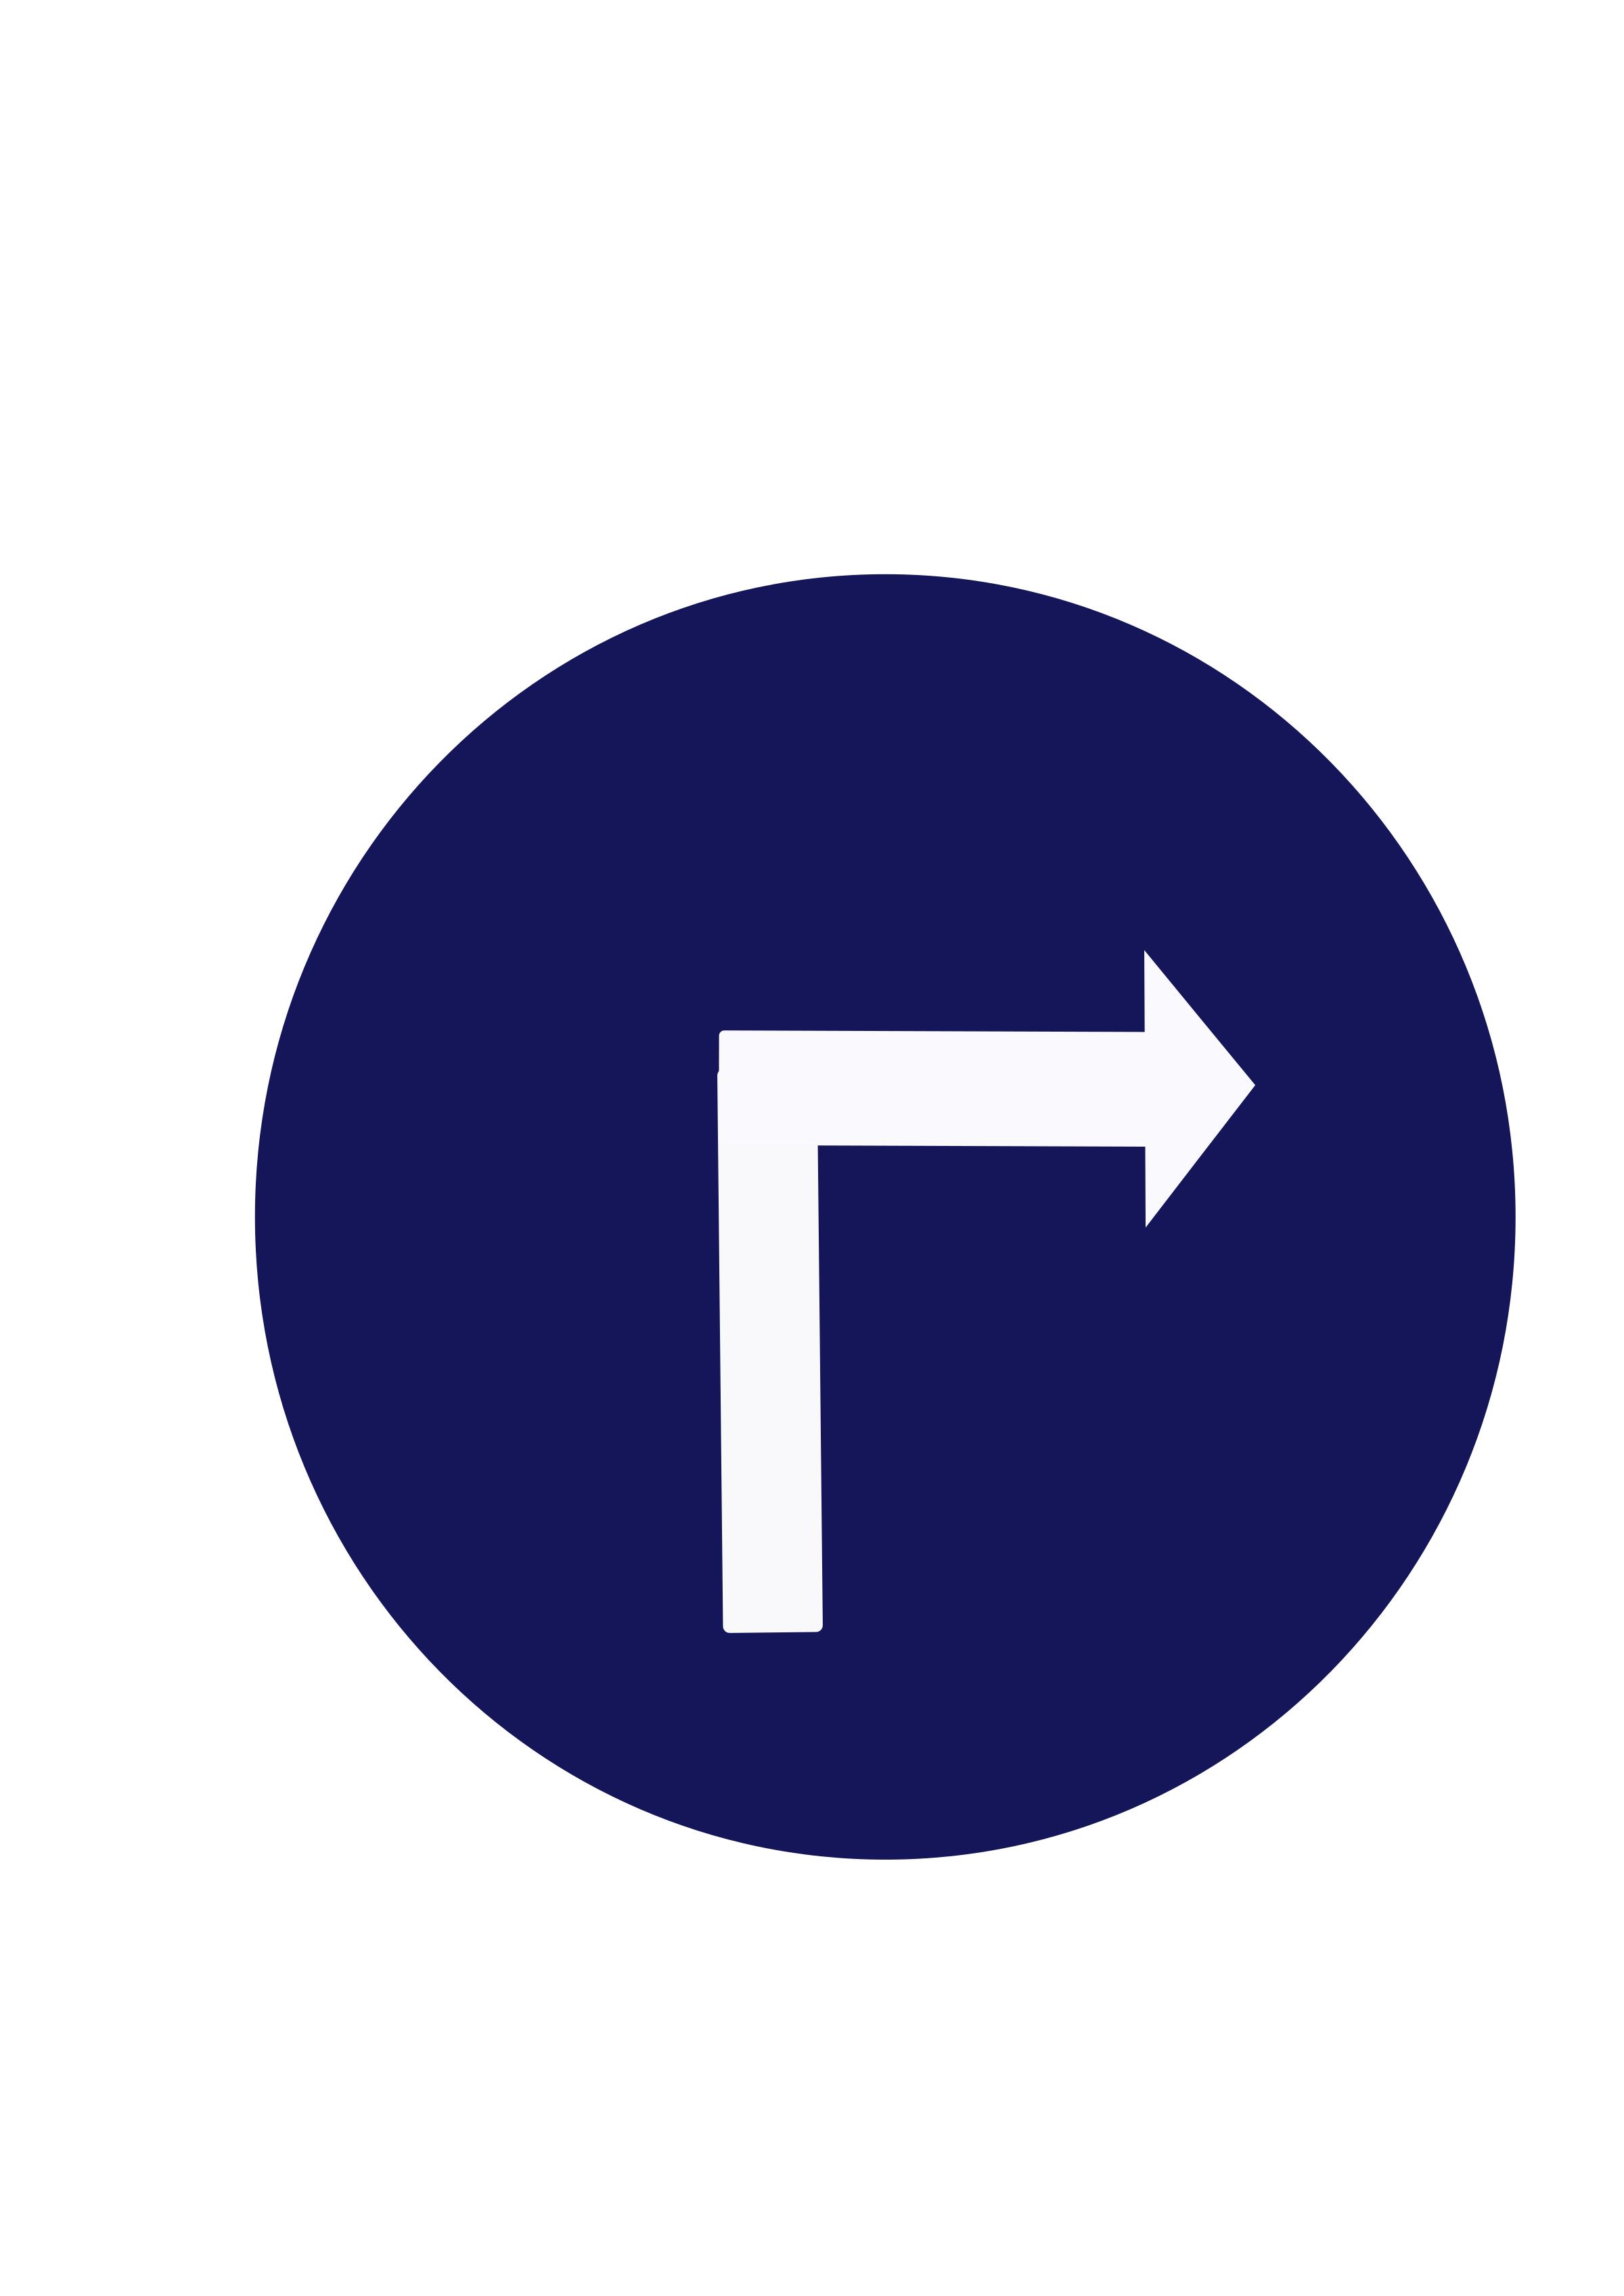 Indian road sign - Compulsory turn right PNG icons